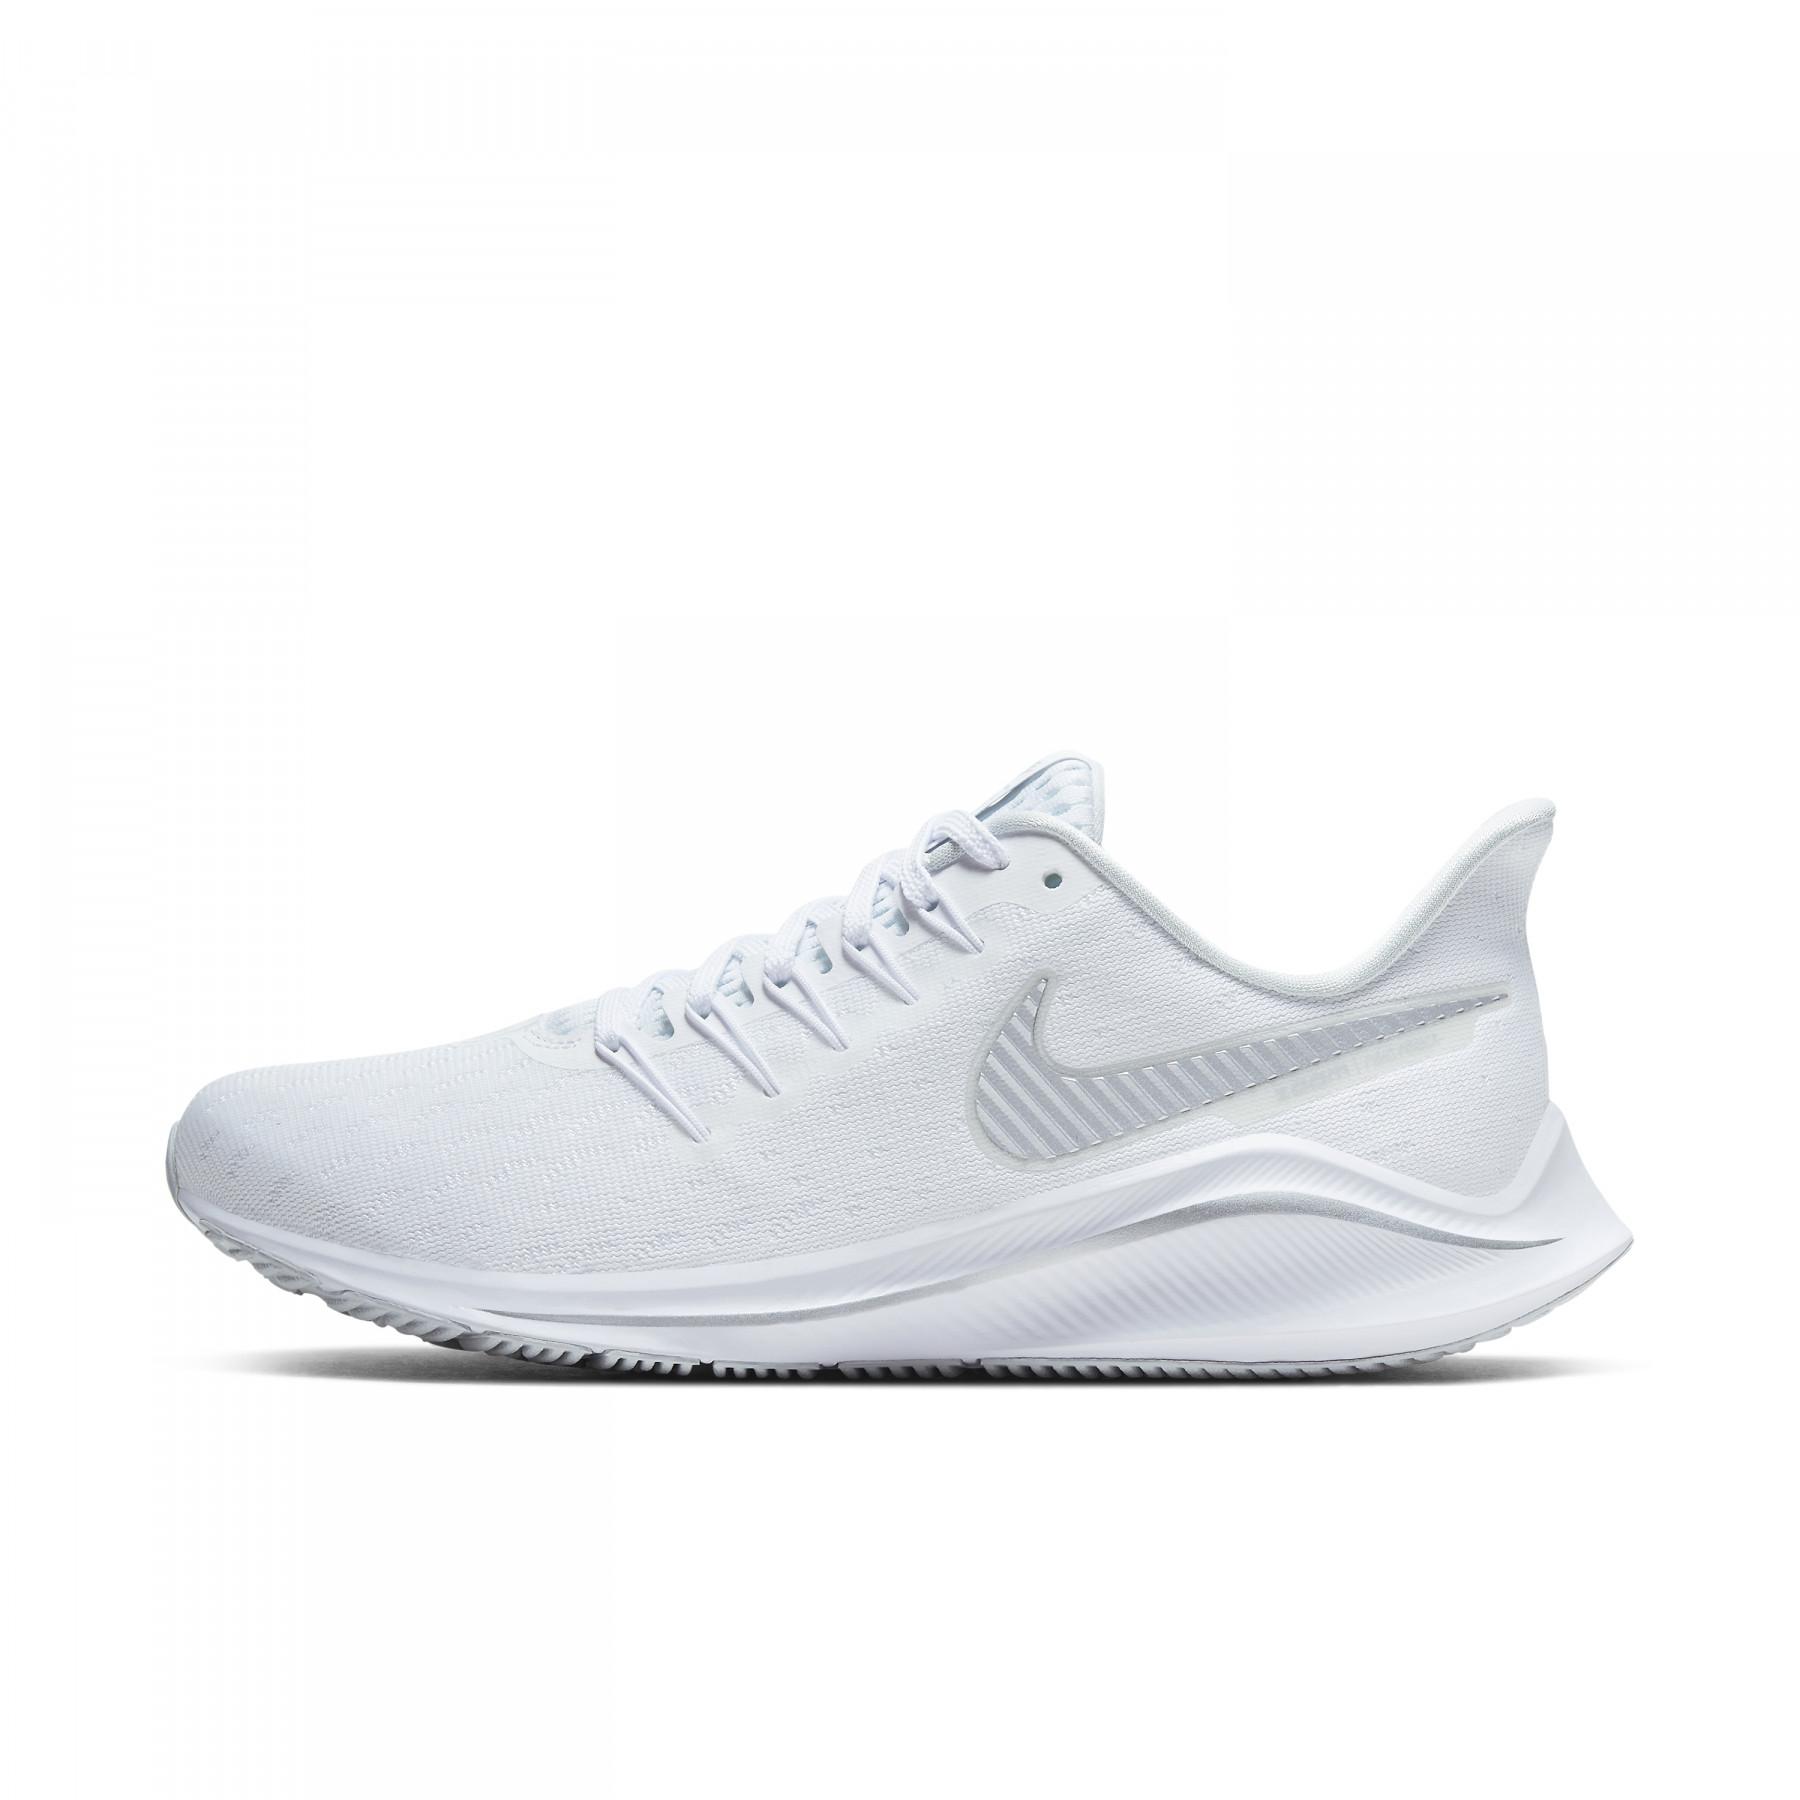 Women's shoes Nike Air Zoom Vomero 14